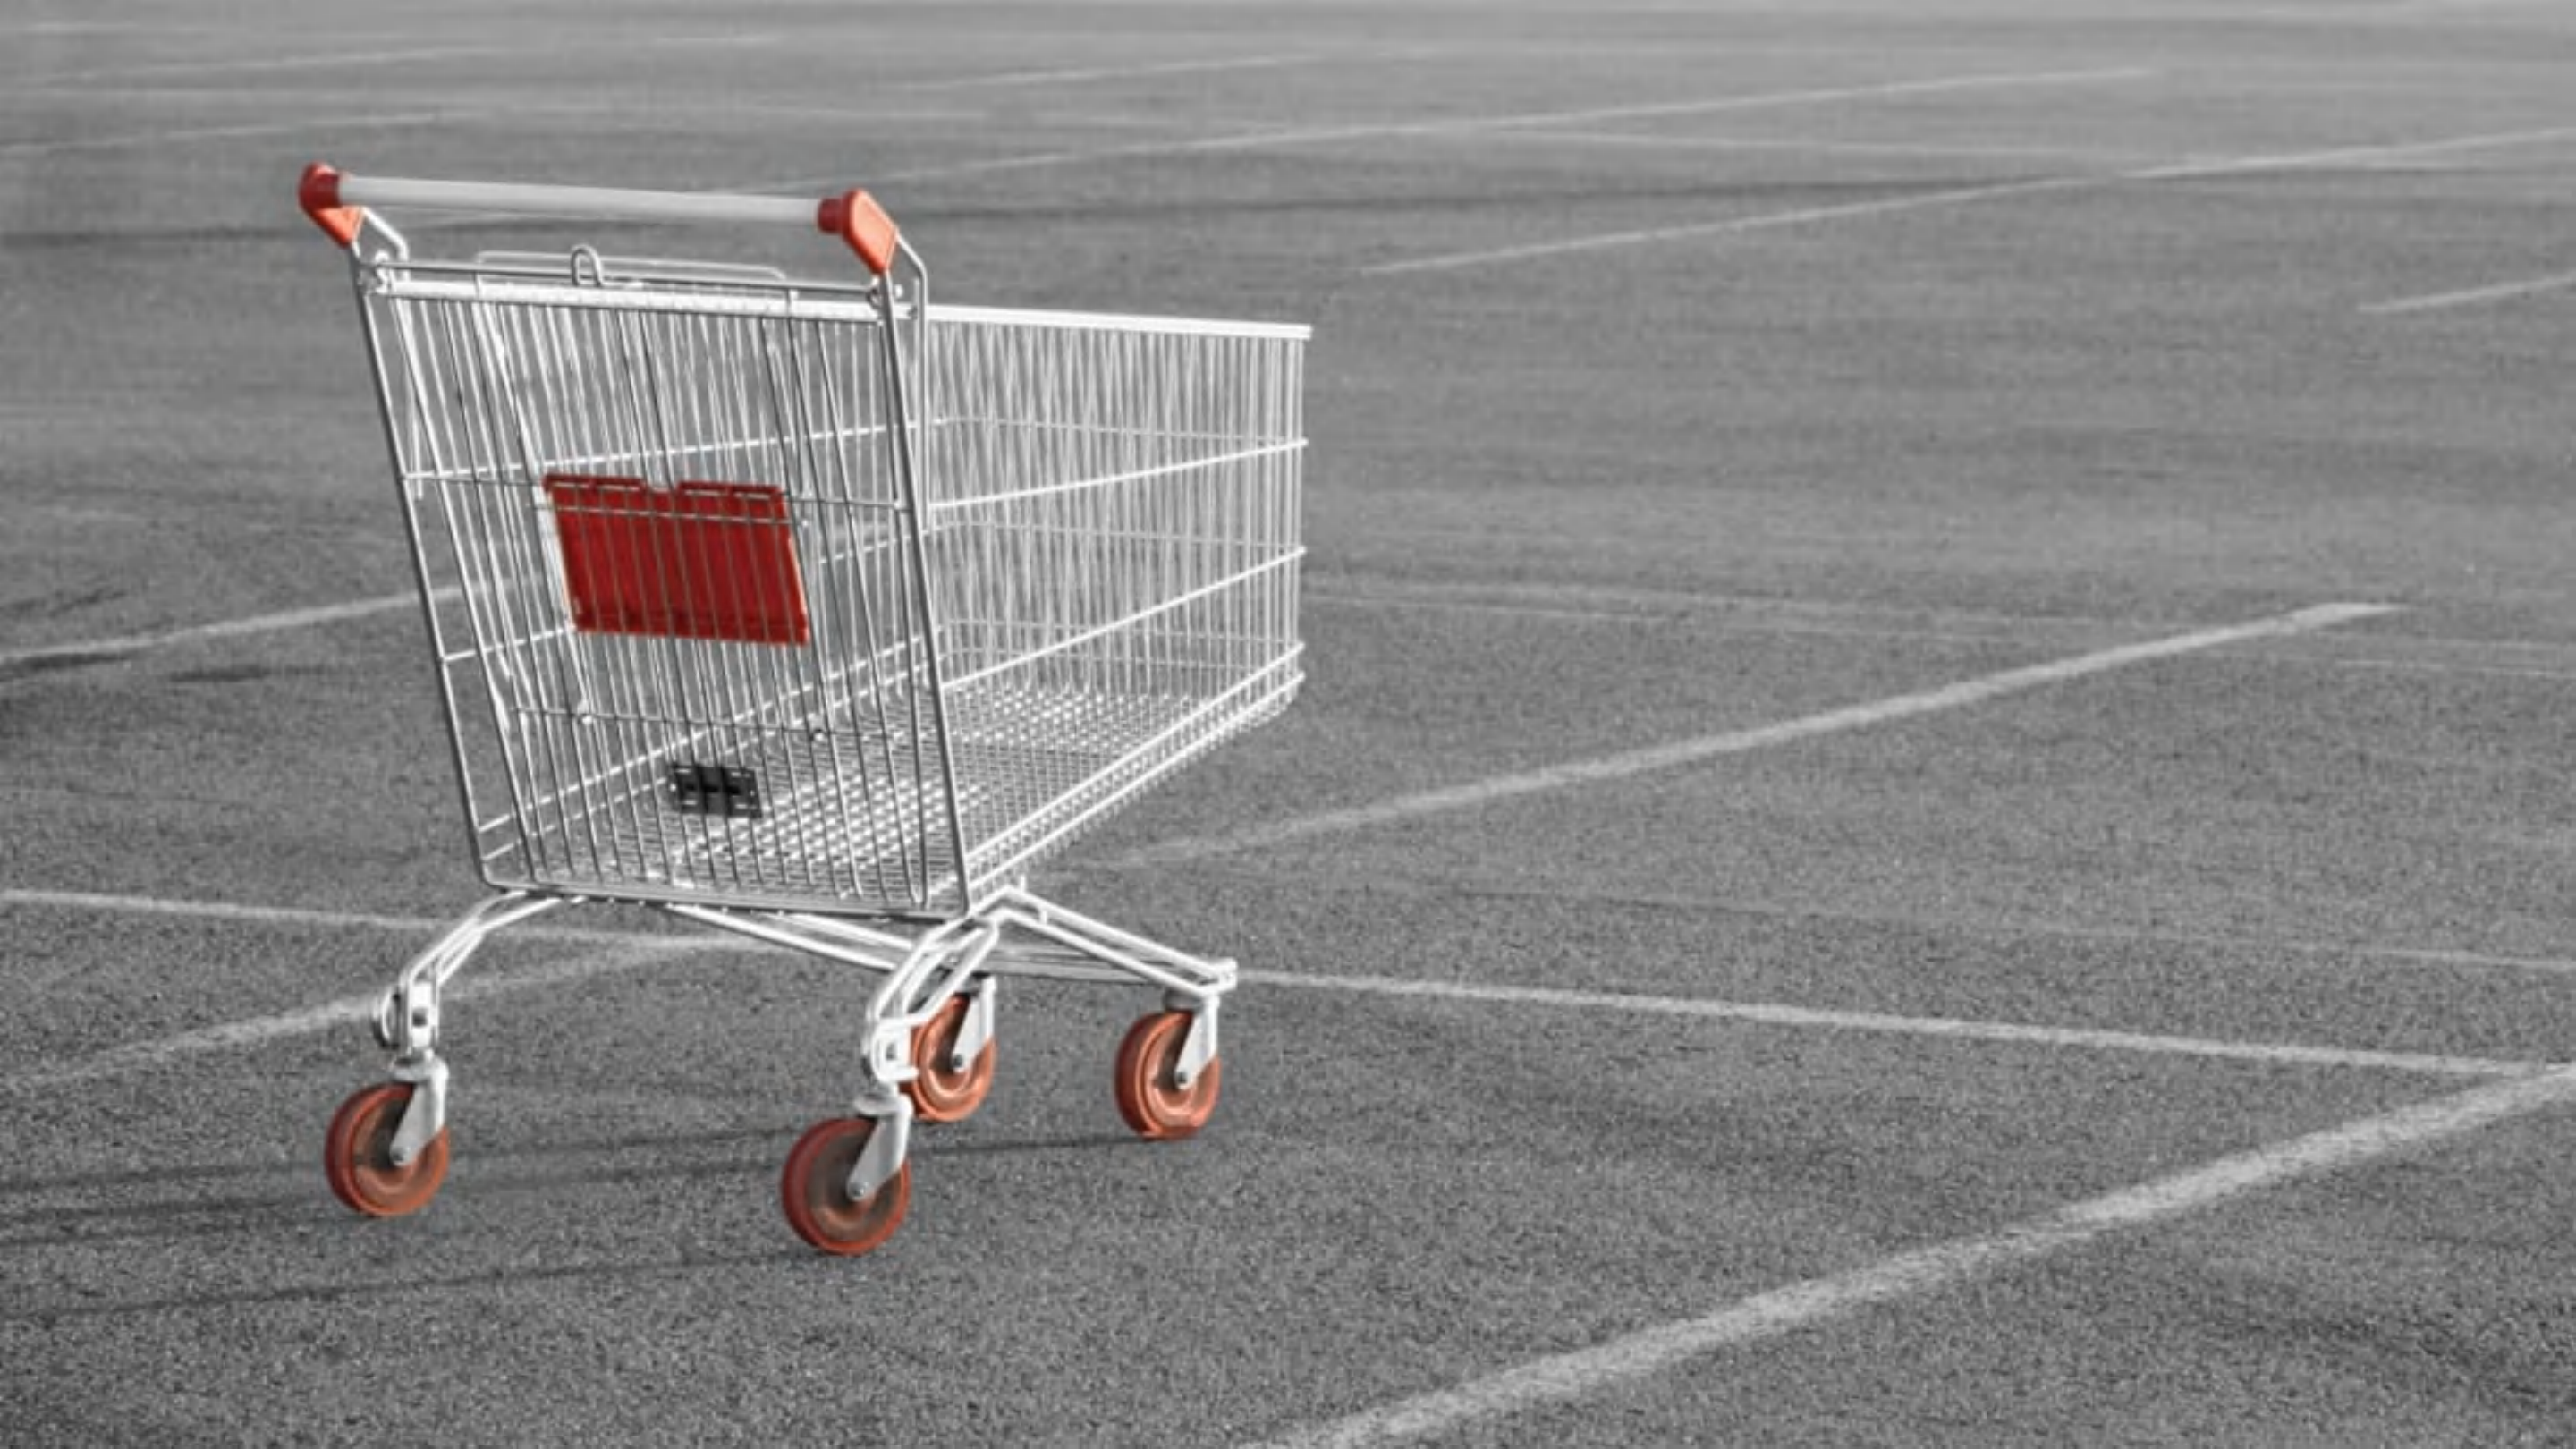 The Reason Some People Never Return Shopping Carts, According to
Science